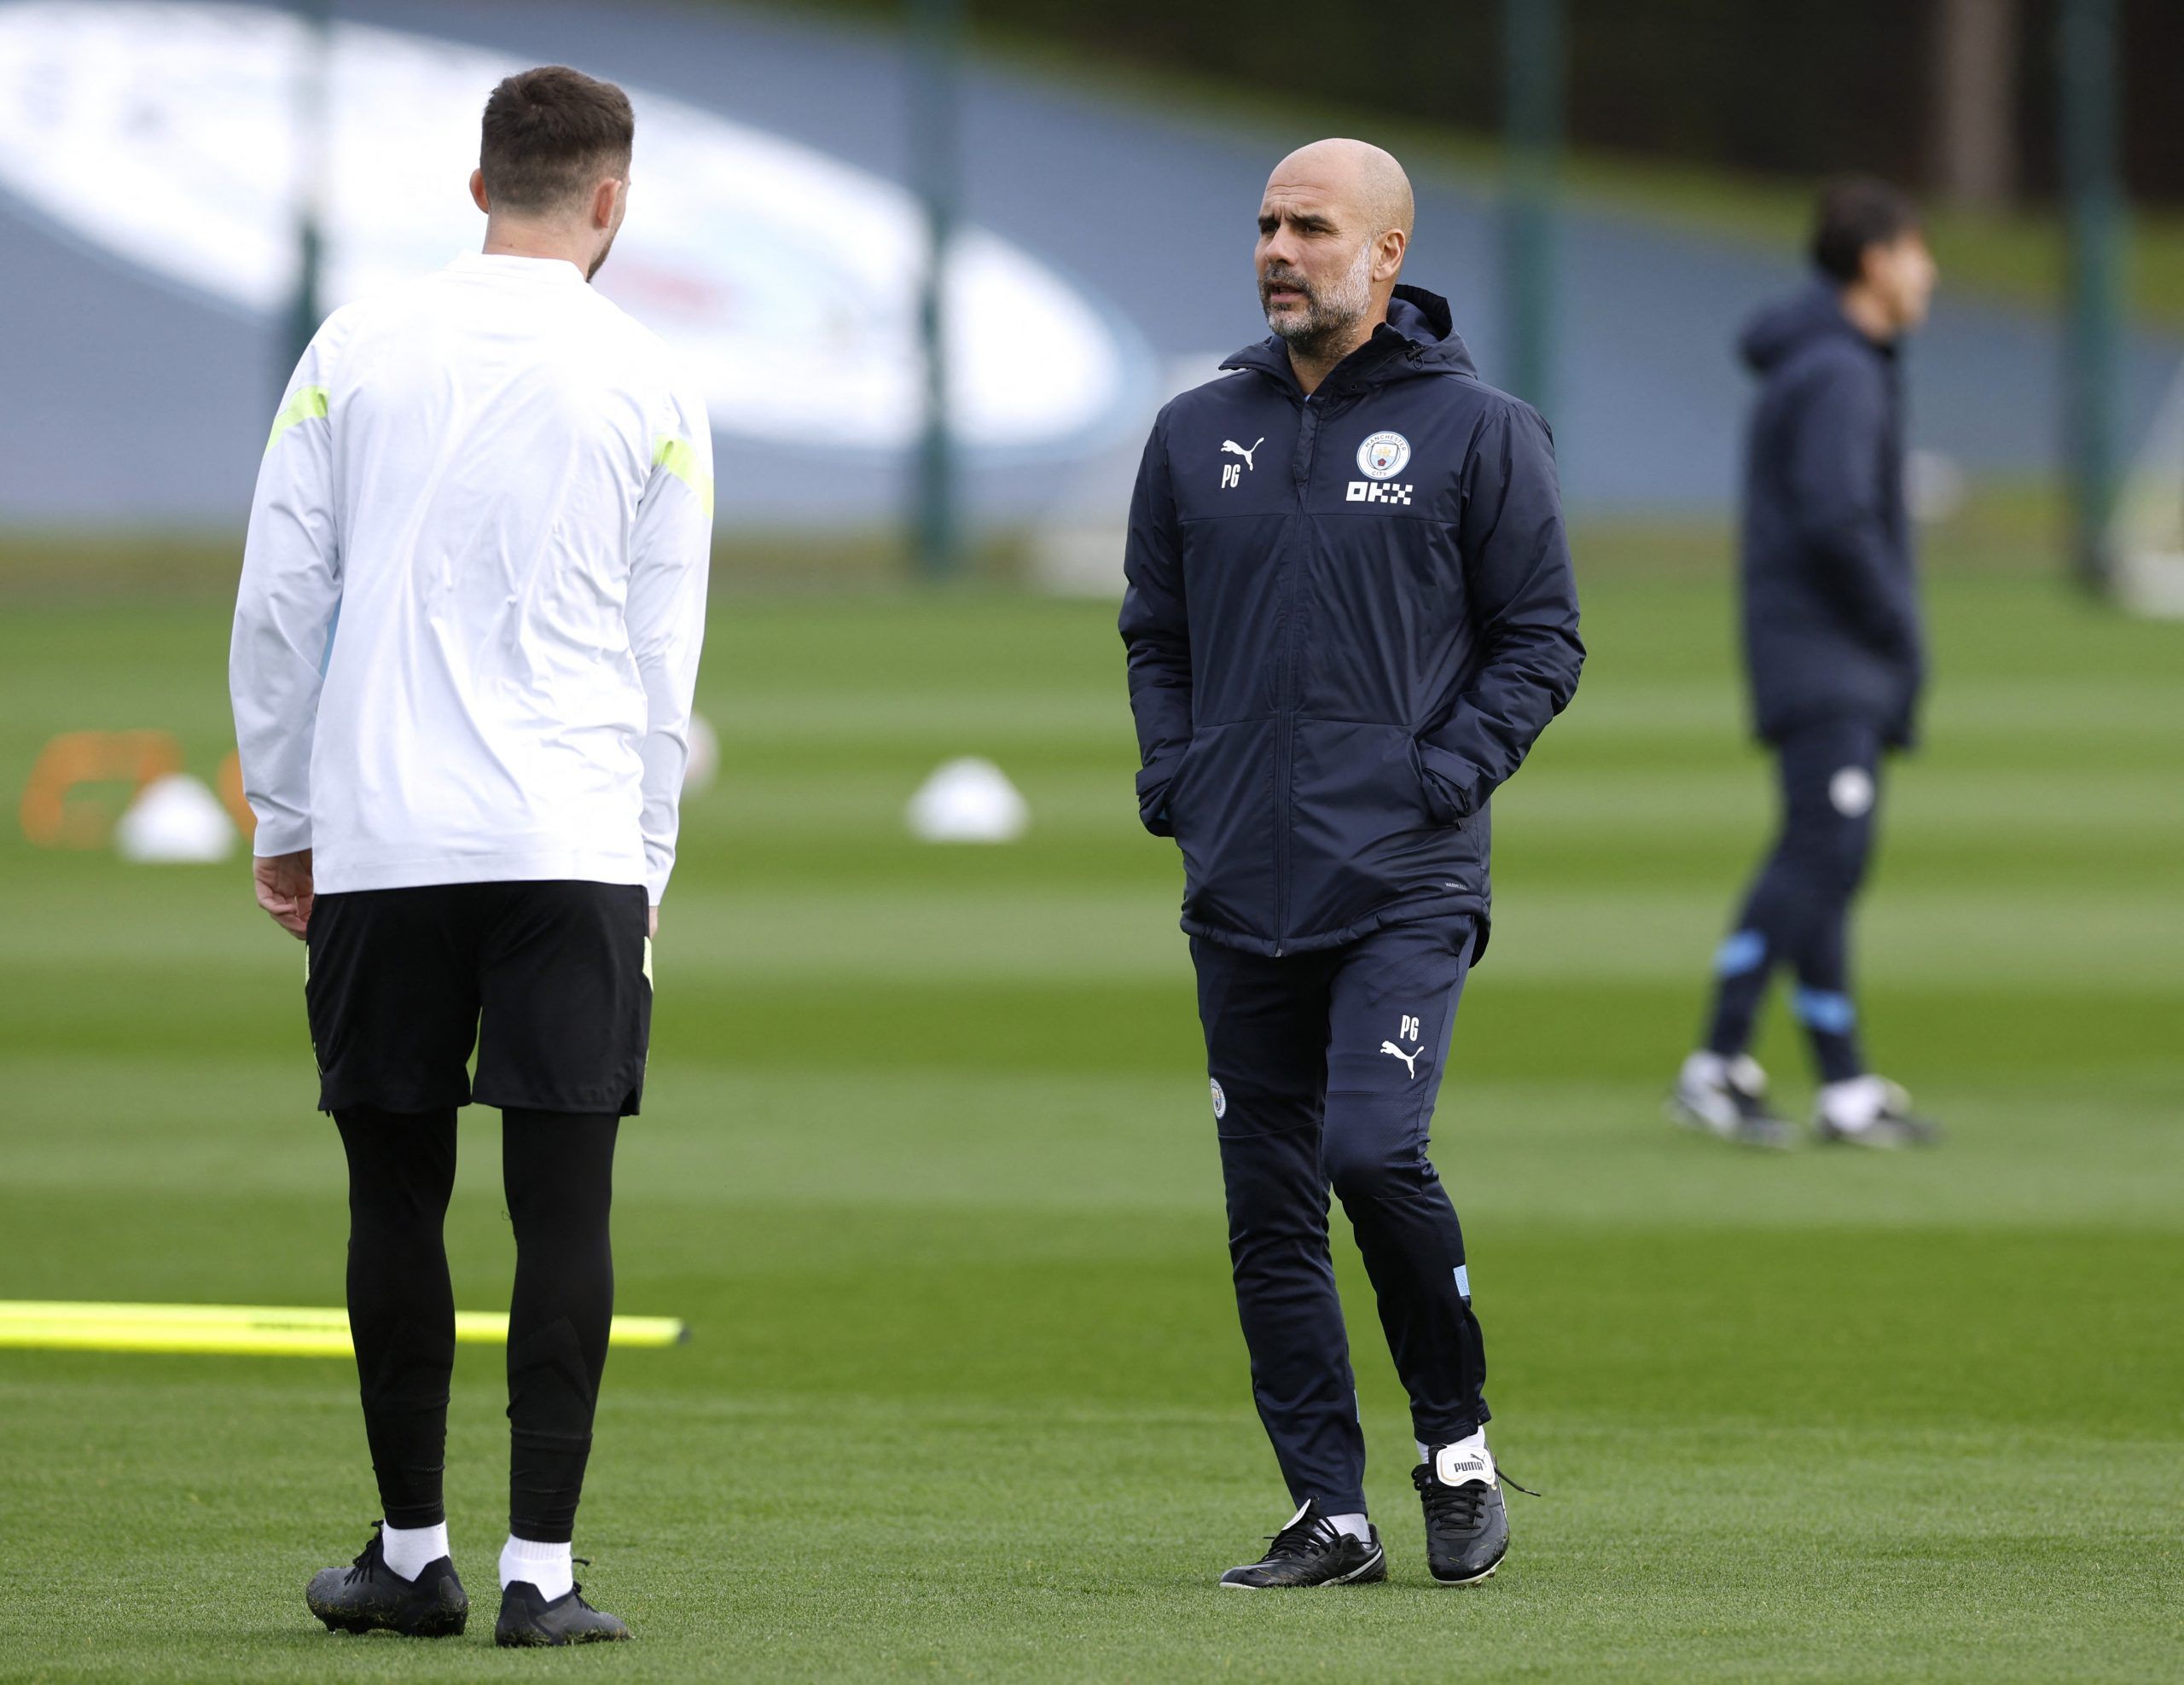 Soccer Football - Champions League - Manchester City Training - Etihad Campus, Manchester, Britain - October 24, 2022 Manchester City manager Pep Guardiola during training Action Images via Reuters/Jason Cairnduff